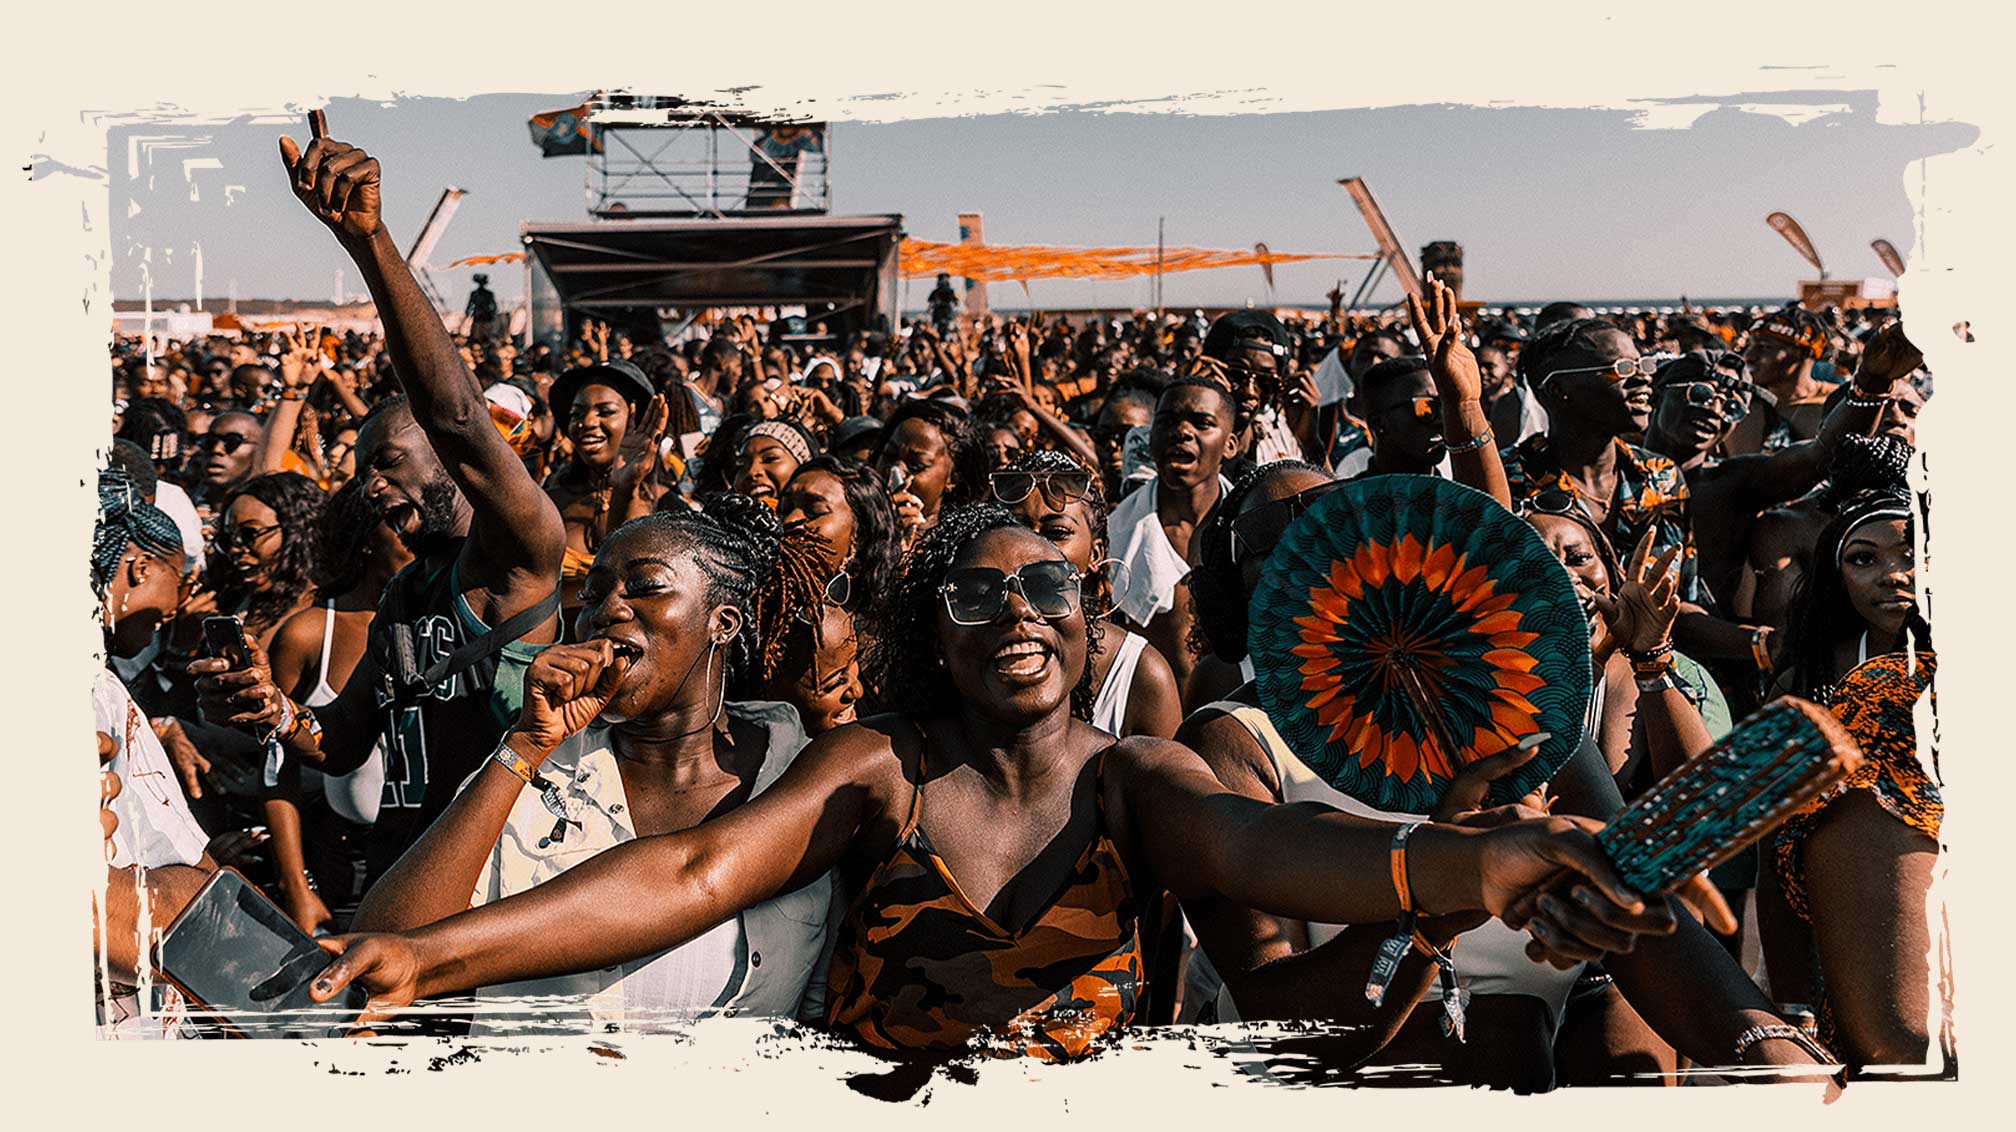 EVENT: Afro Nation Faces Backlash After Not Issuing Refunds. [@Afronation]